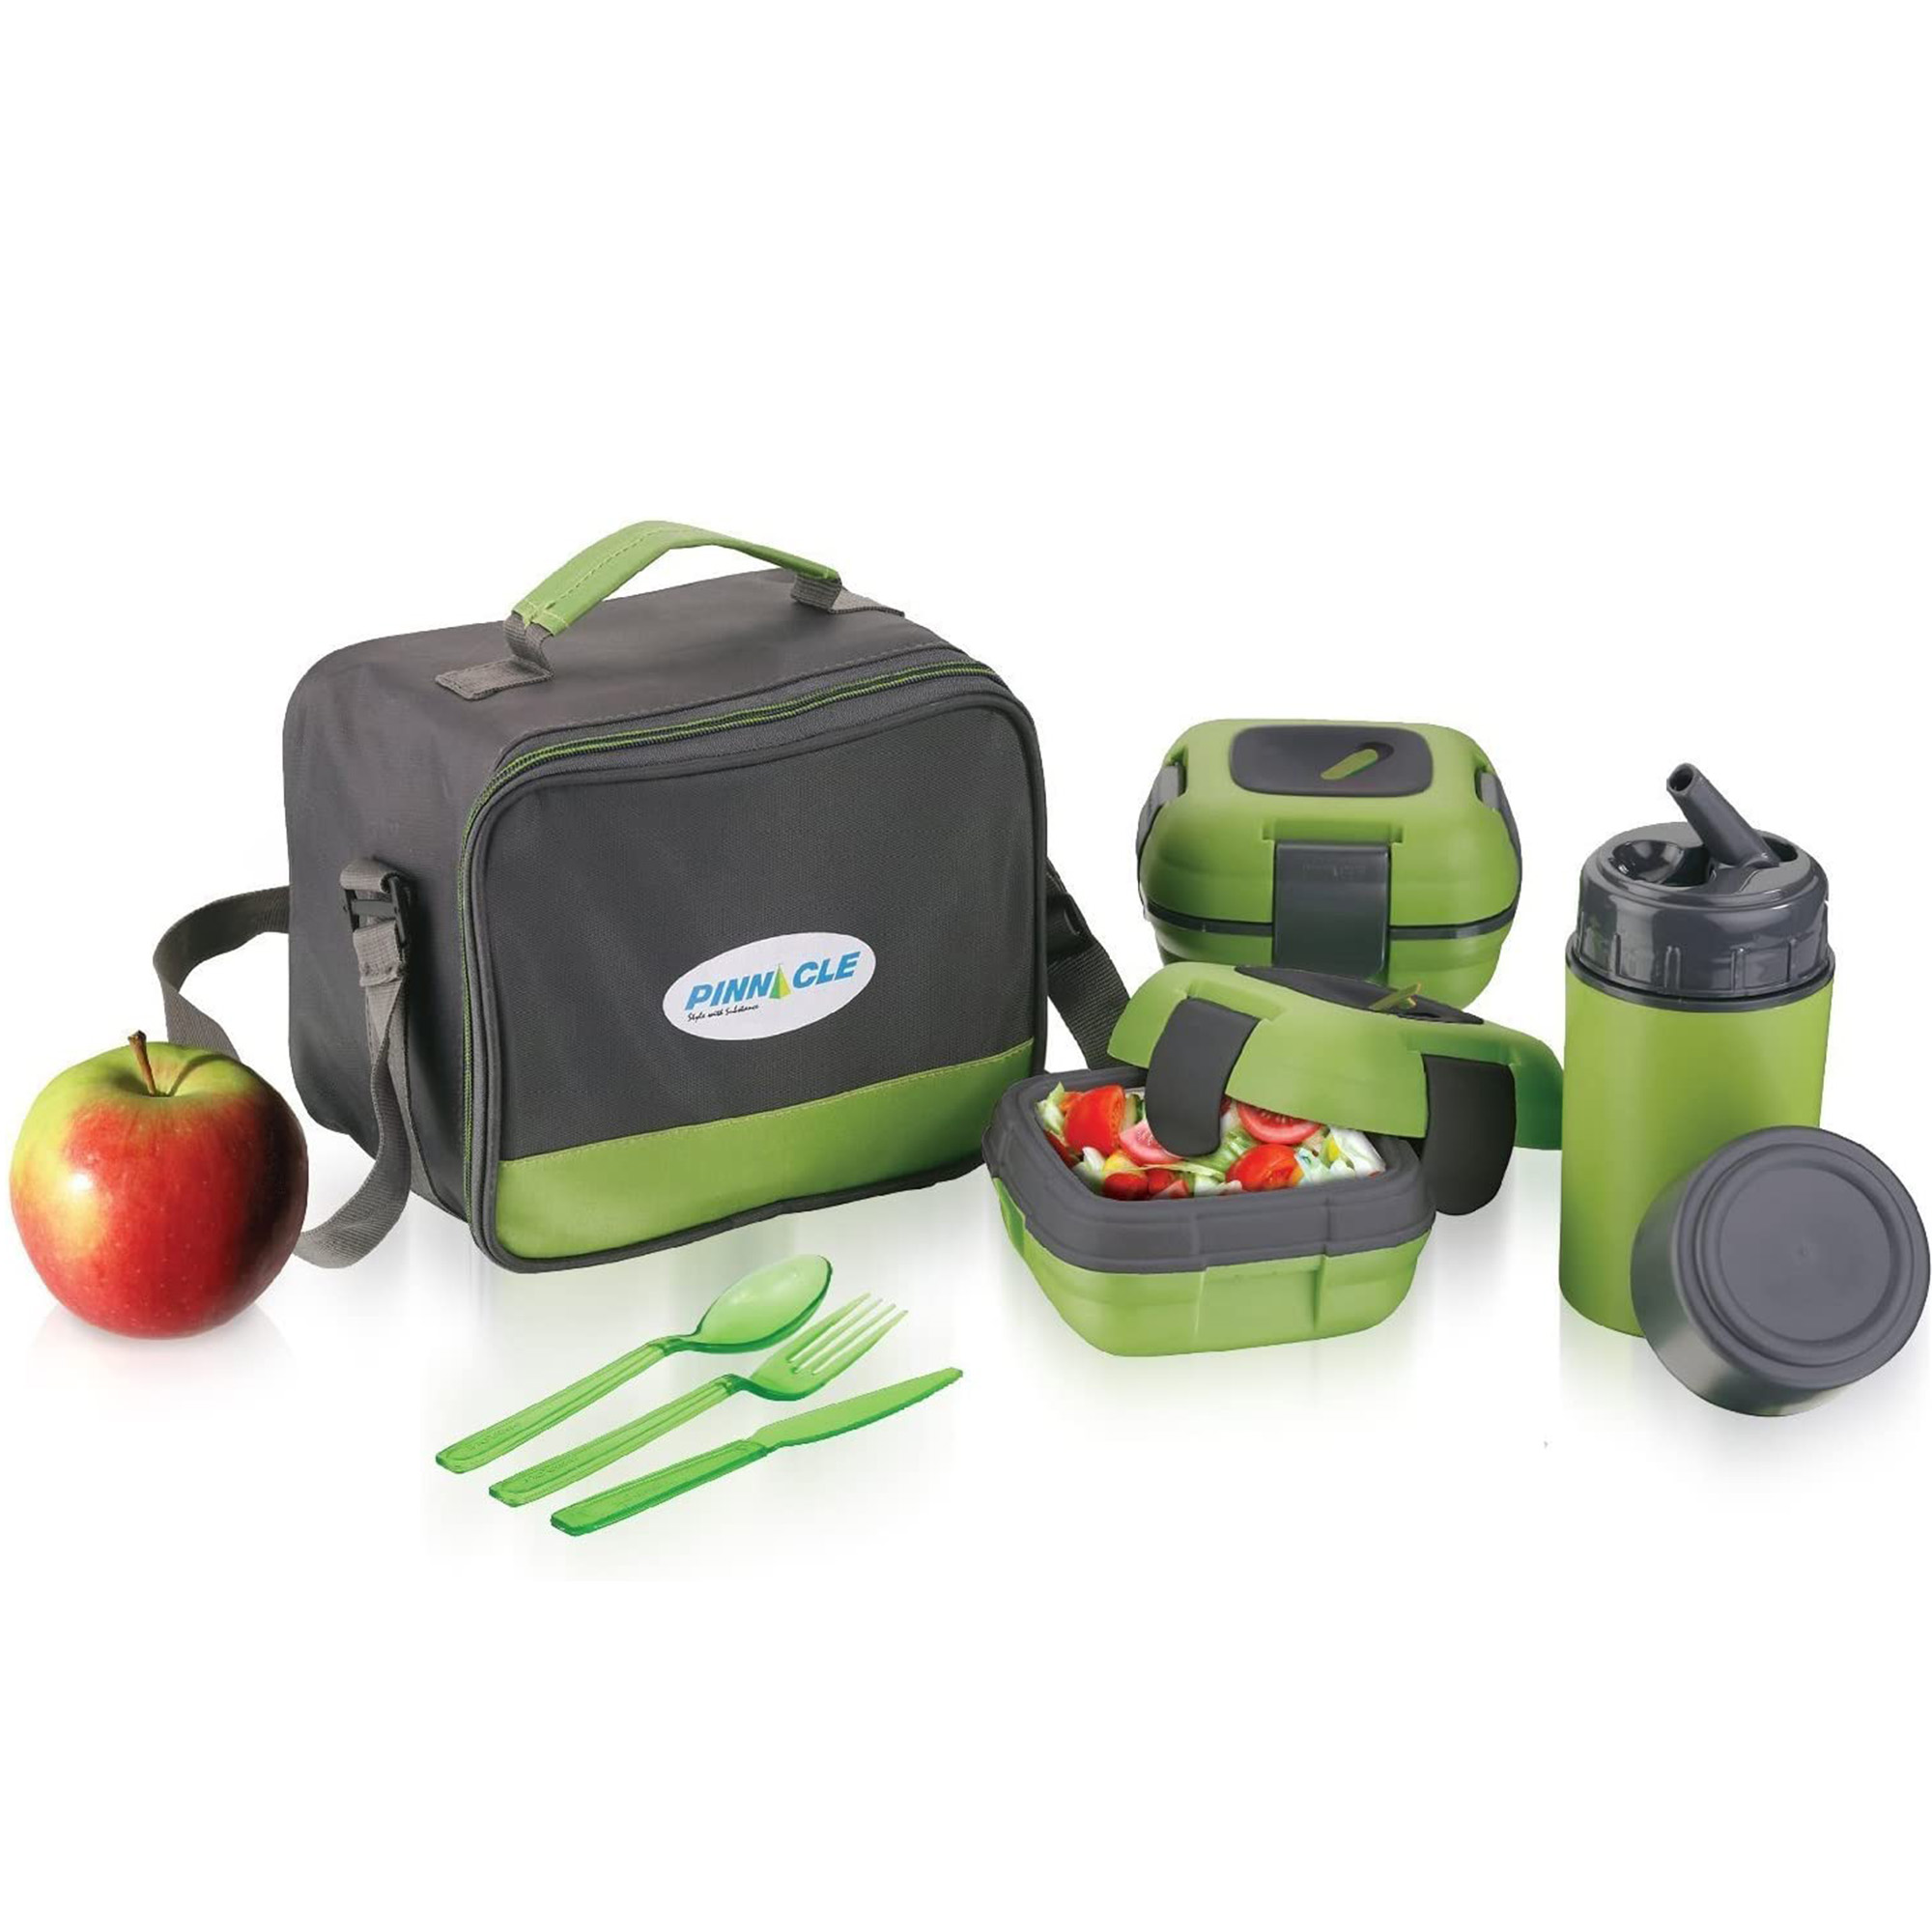 Pinnacle Thermoware Thermal Lunch Box Set Lunch Containers for Adults & Kids, Green - image 1 of 9